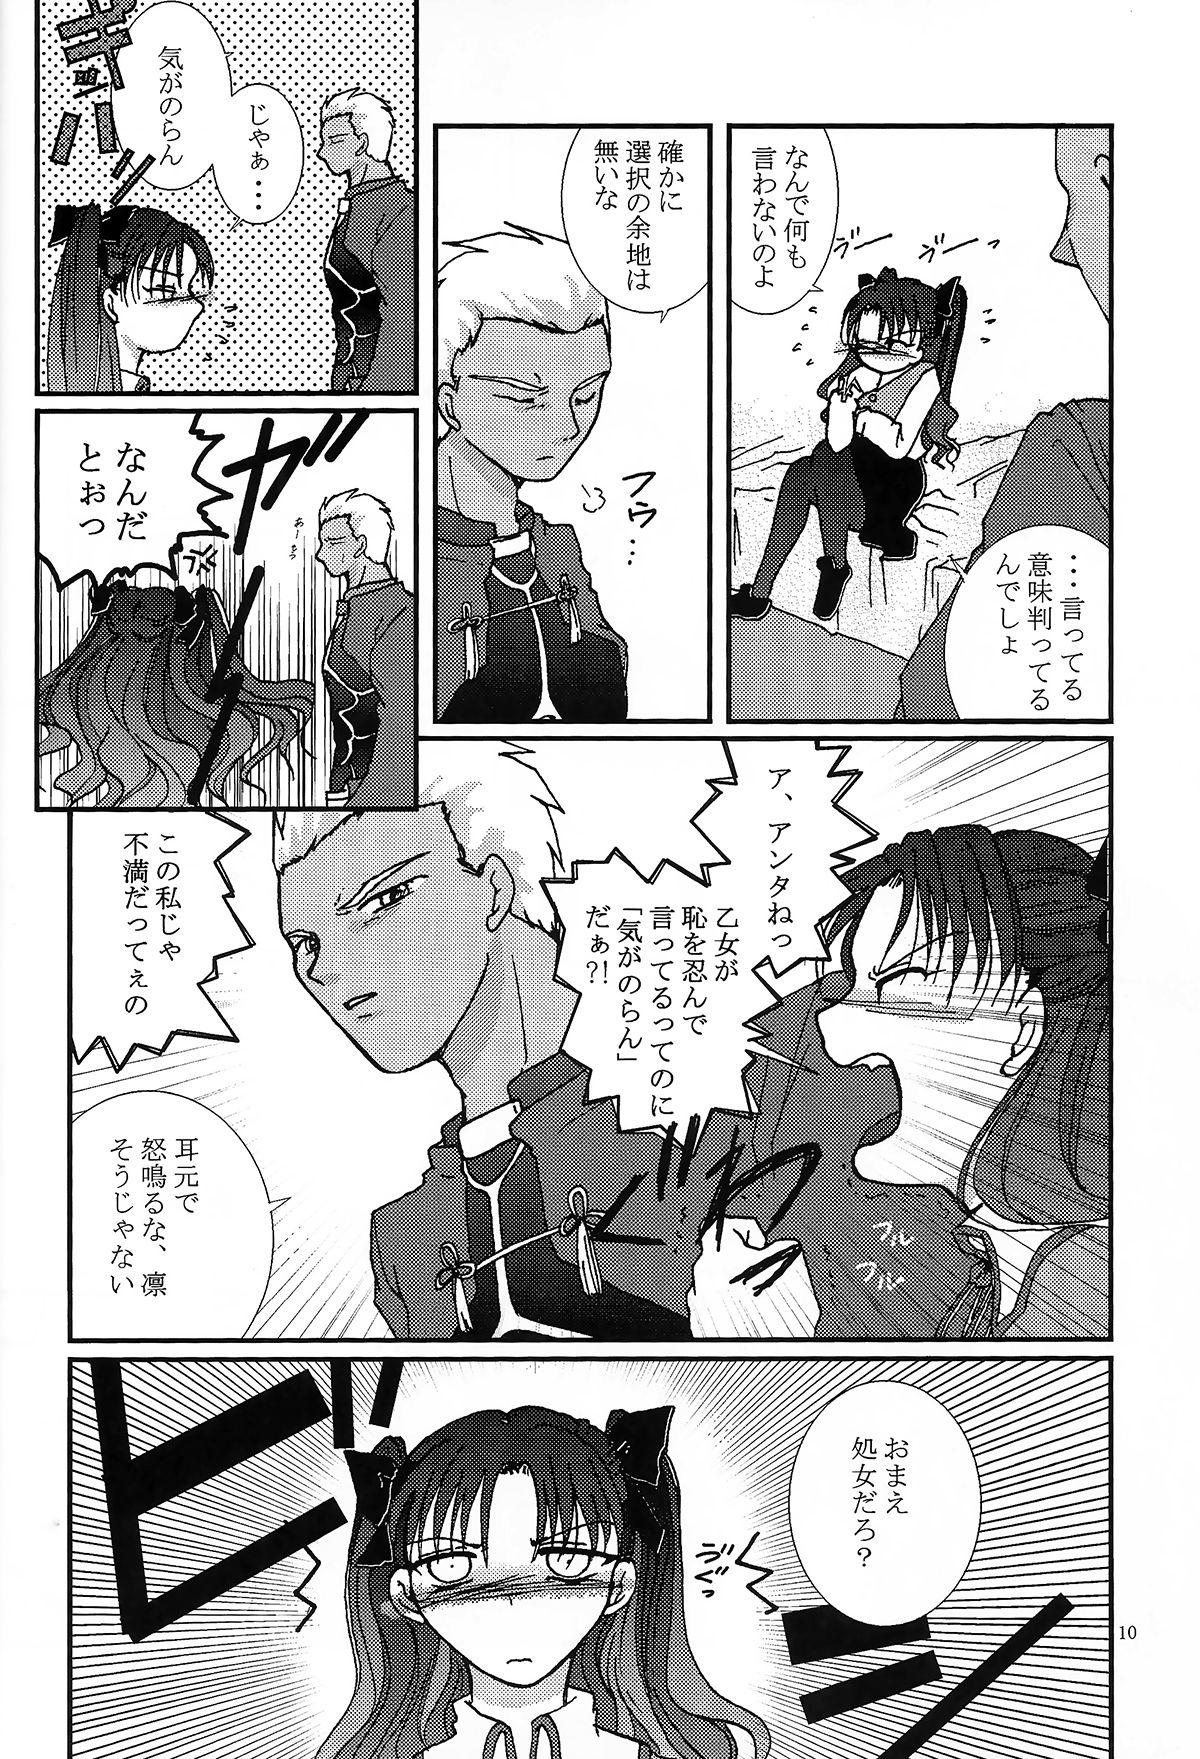 Tgirl Question-7 - Fate stay night College - Page 8